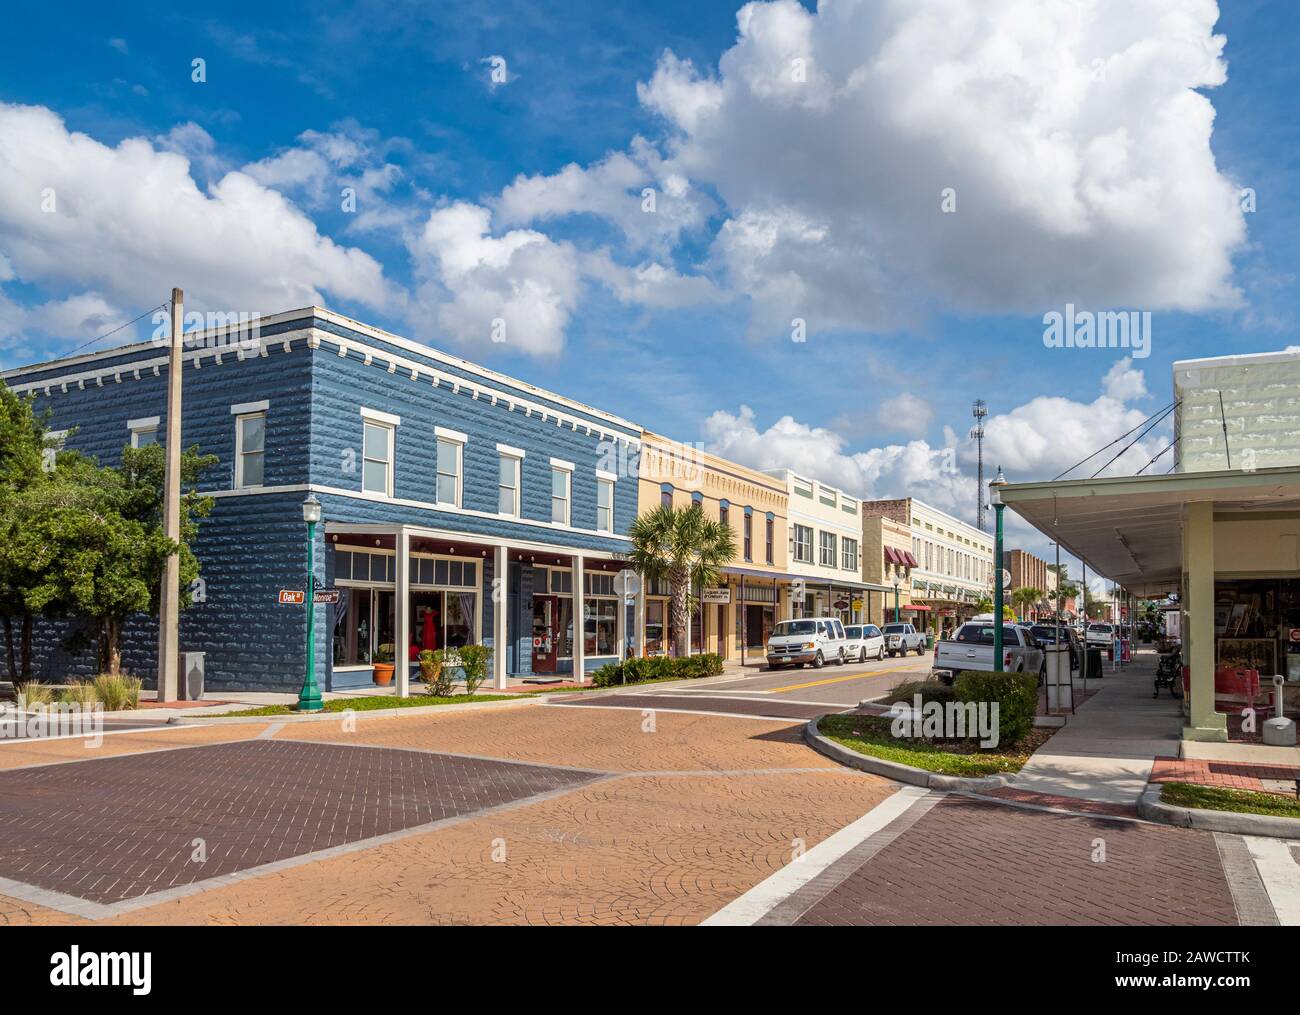 Oak Street in historic District listed on the National Register of Historic Places in antique shopping town of Arcadia Florida. Stock Photo